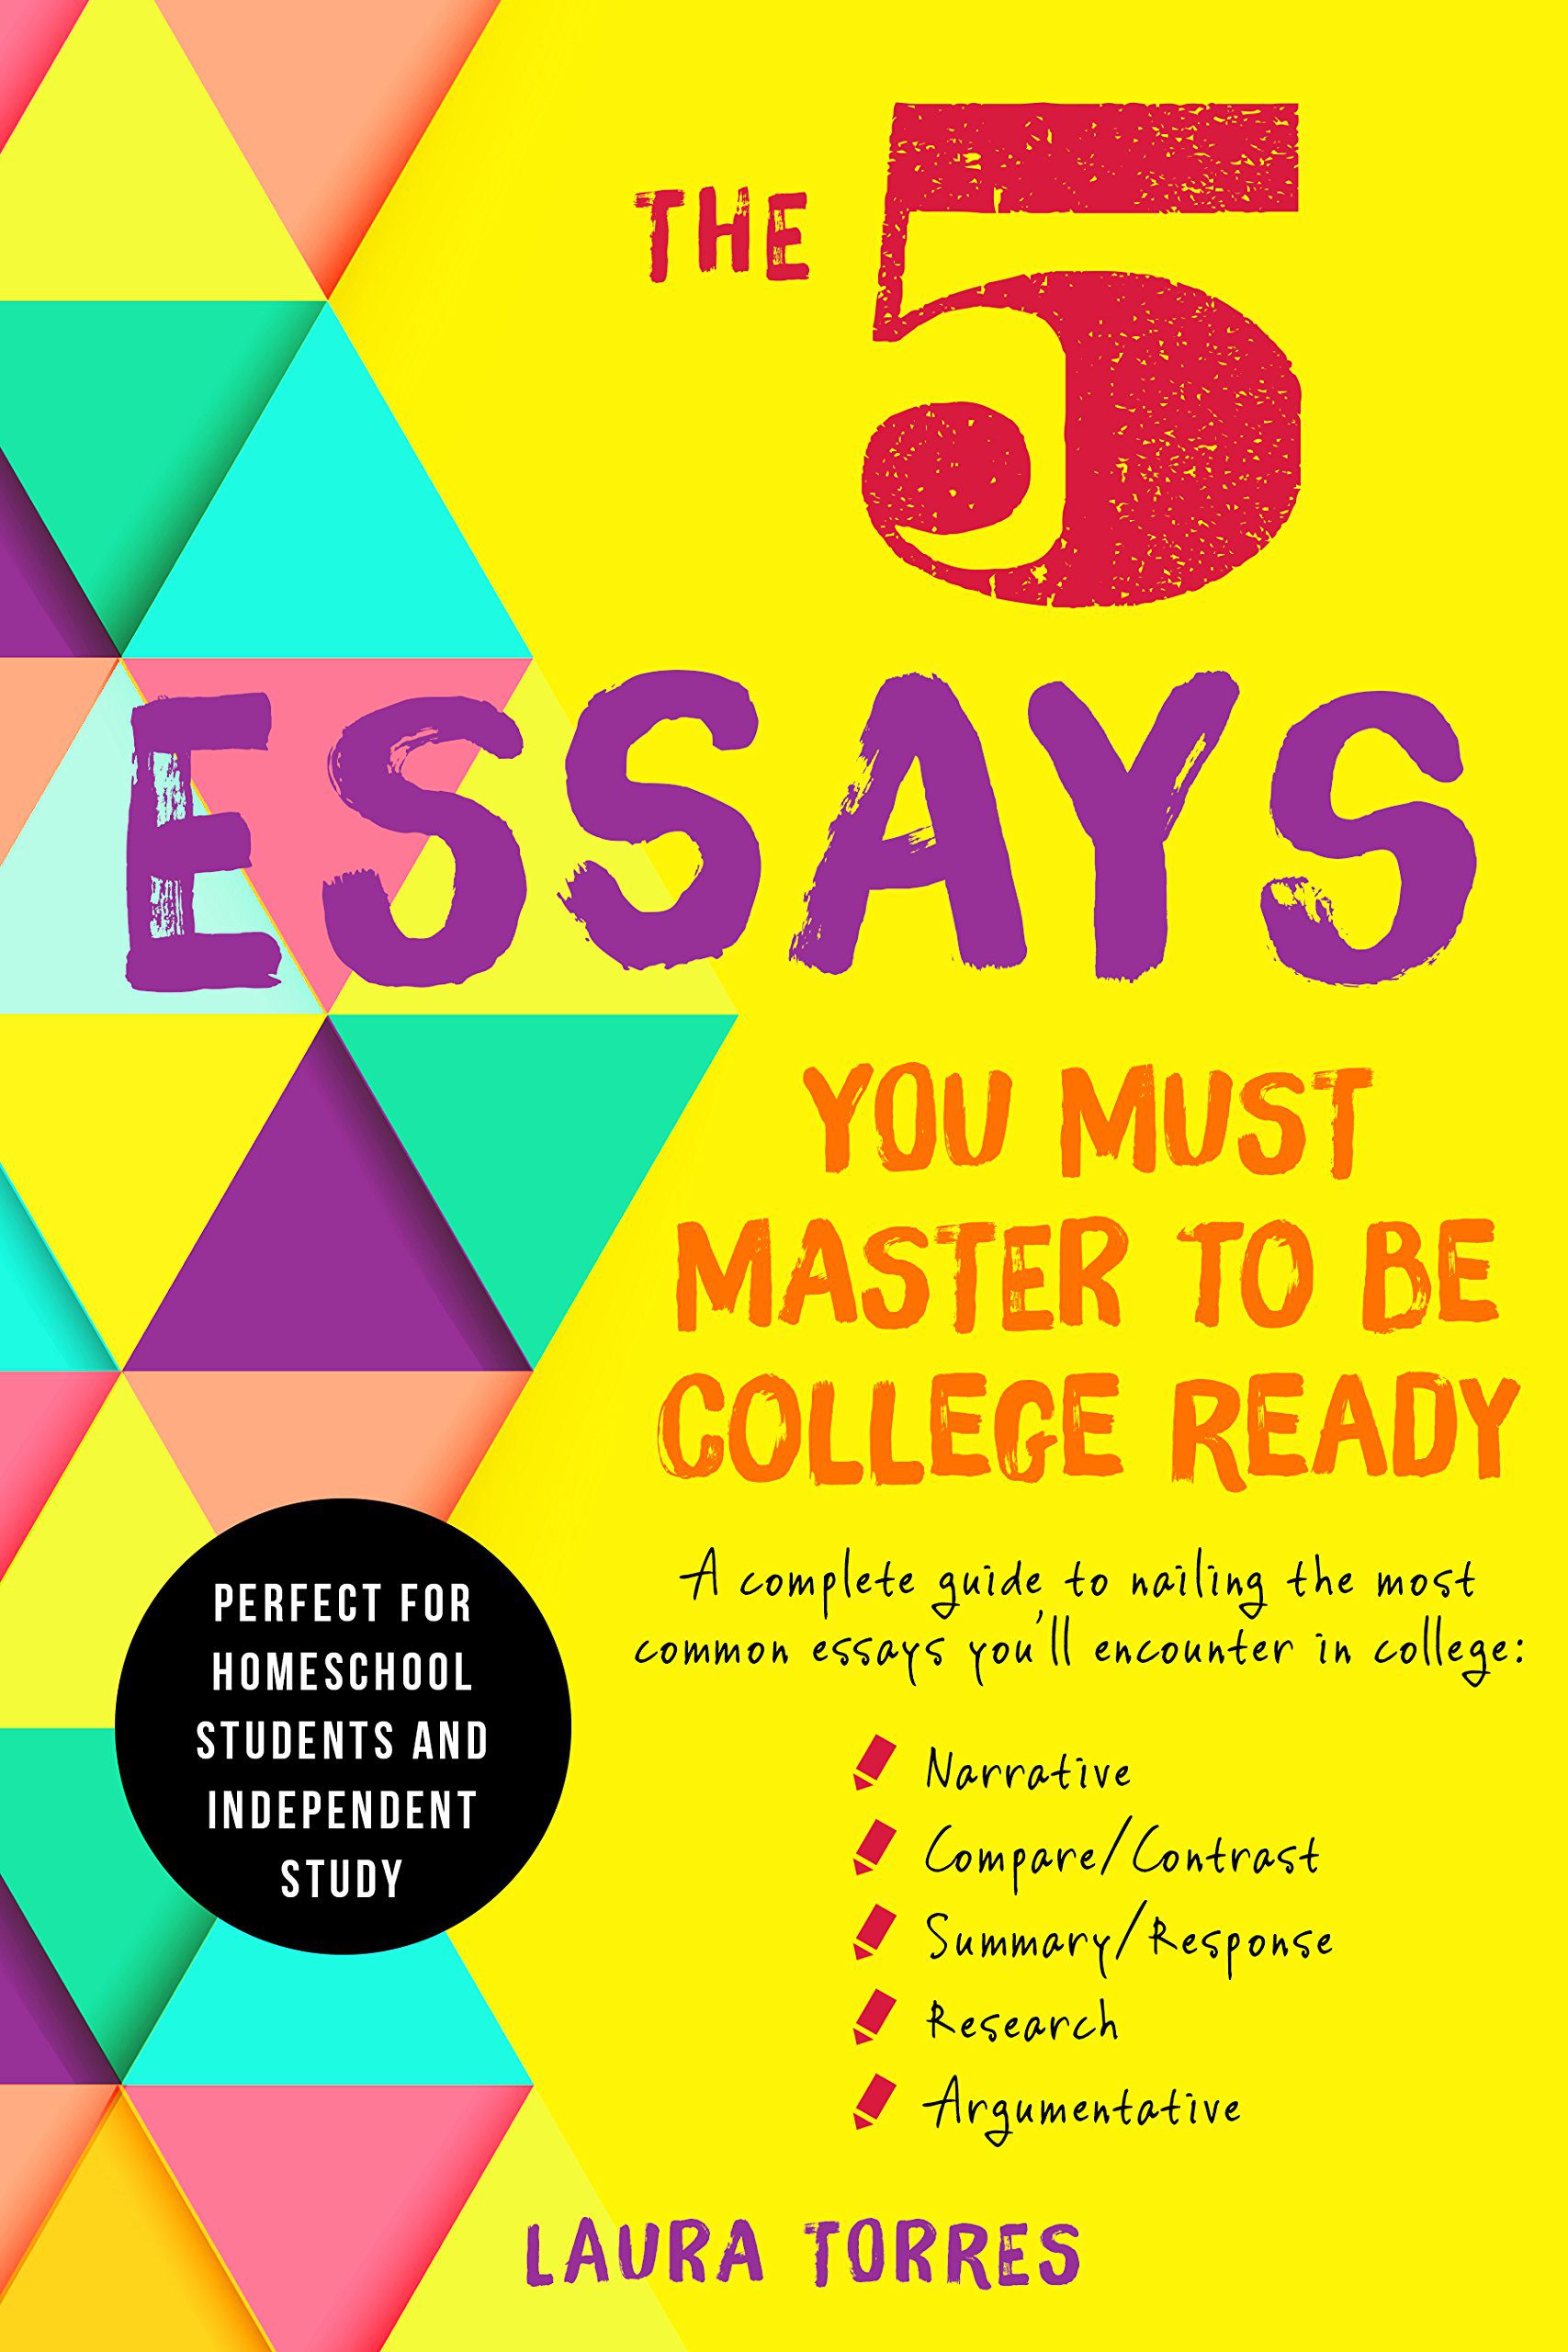 5 Essays You Must Master To Be College Ready: A Complete Guide to Nailing the Most Common Essays You'll Encounter In College